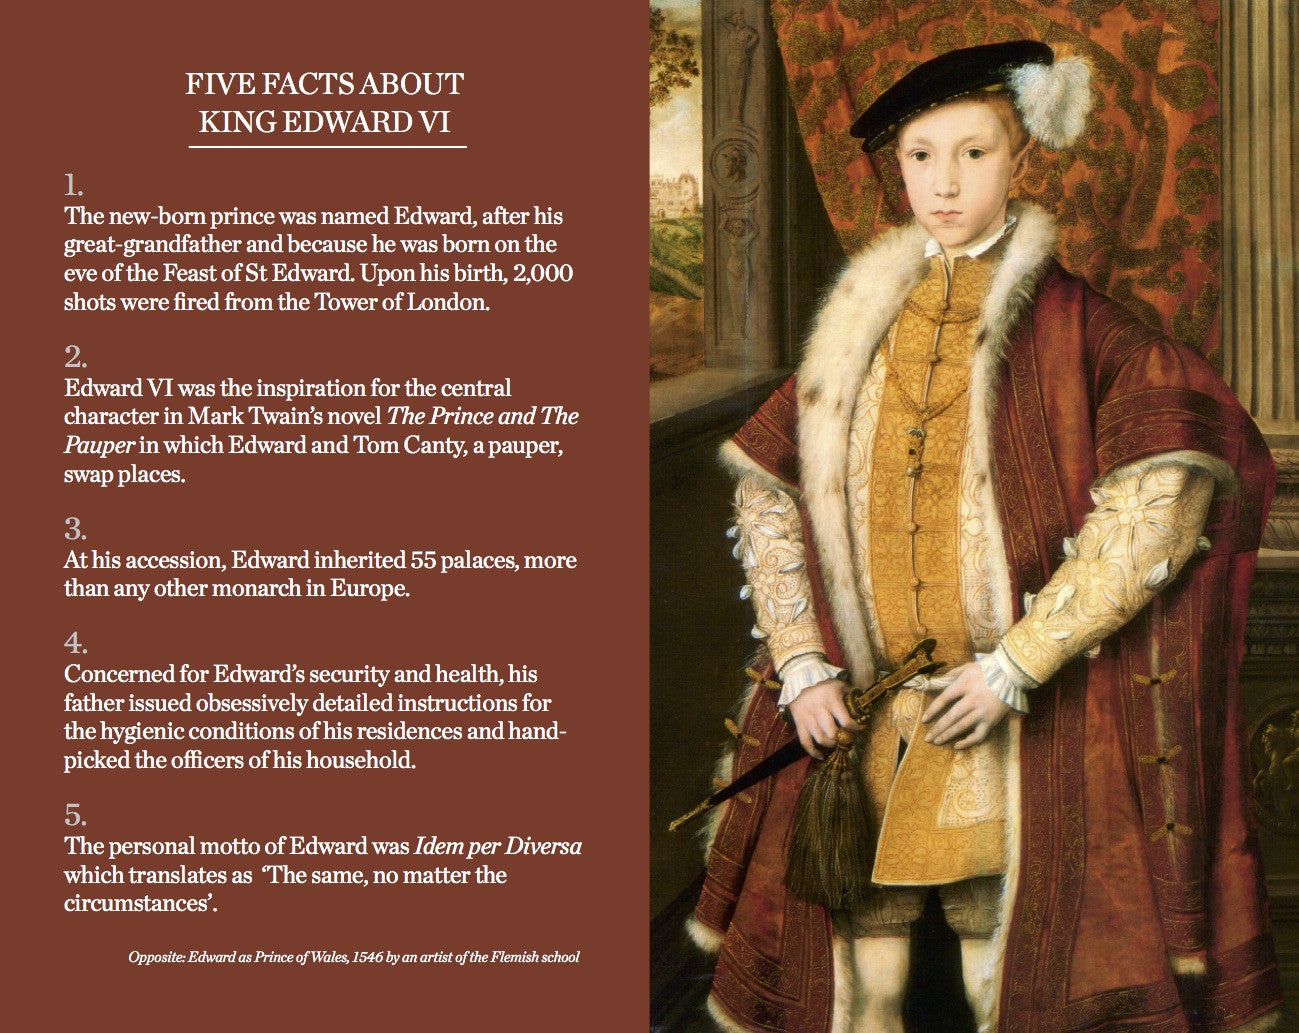 The Connell Short Guide to Edward VI